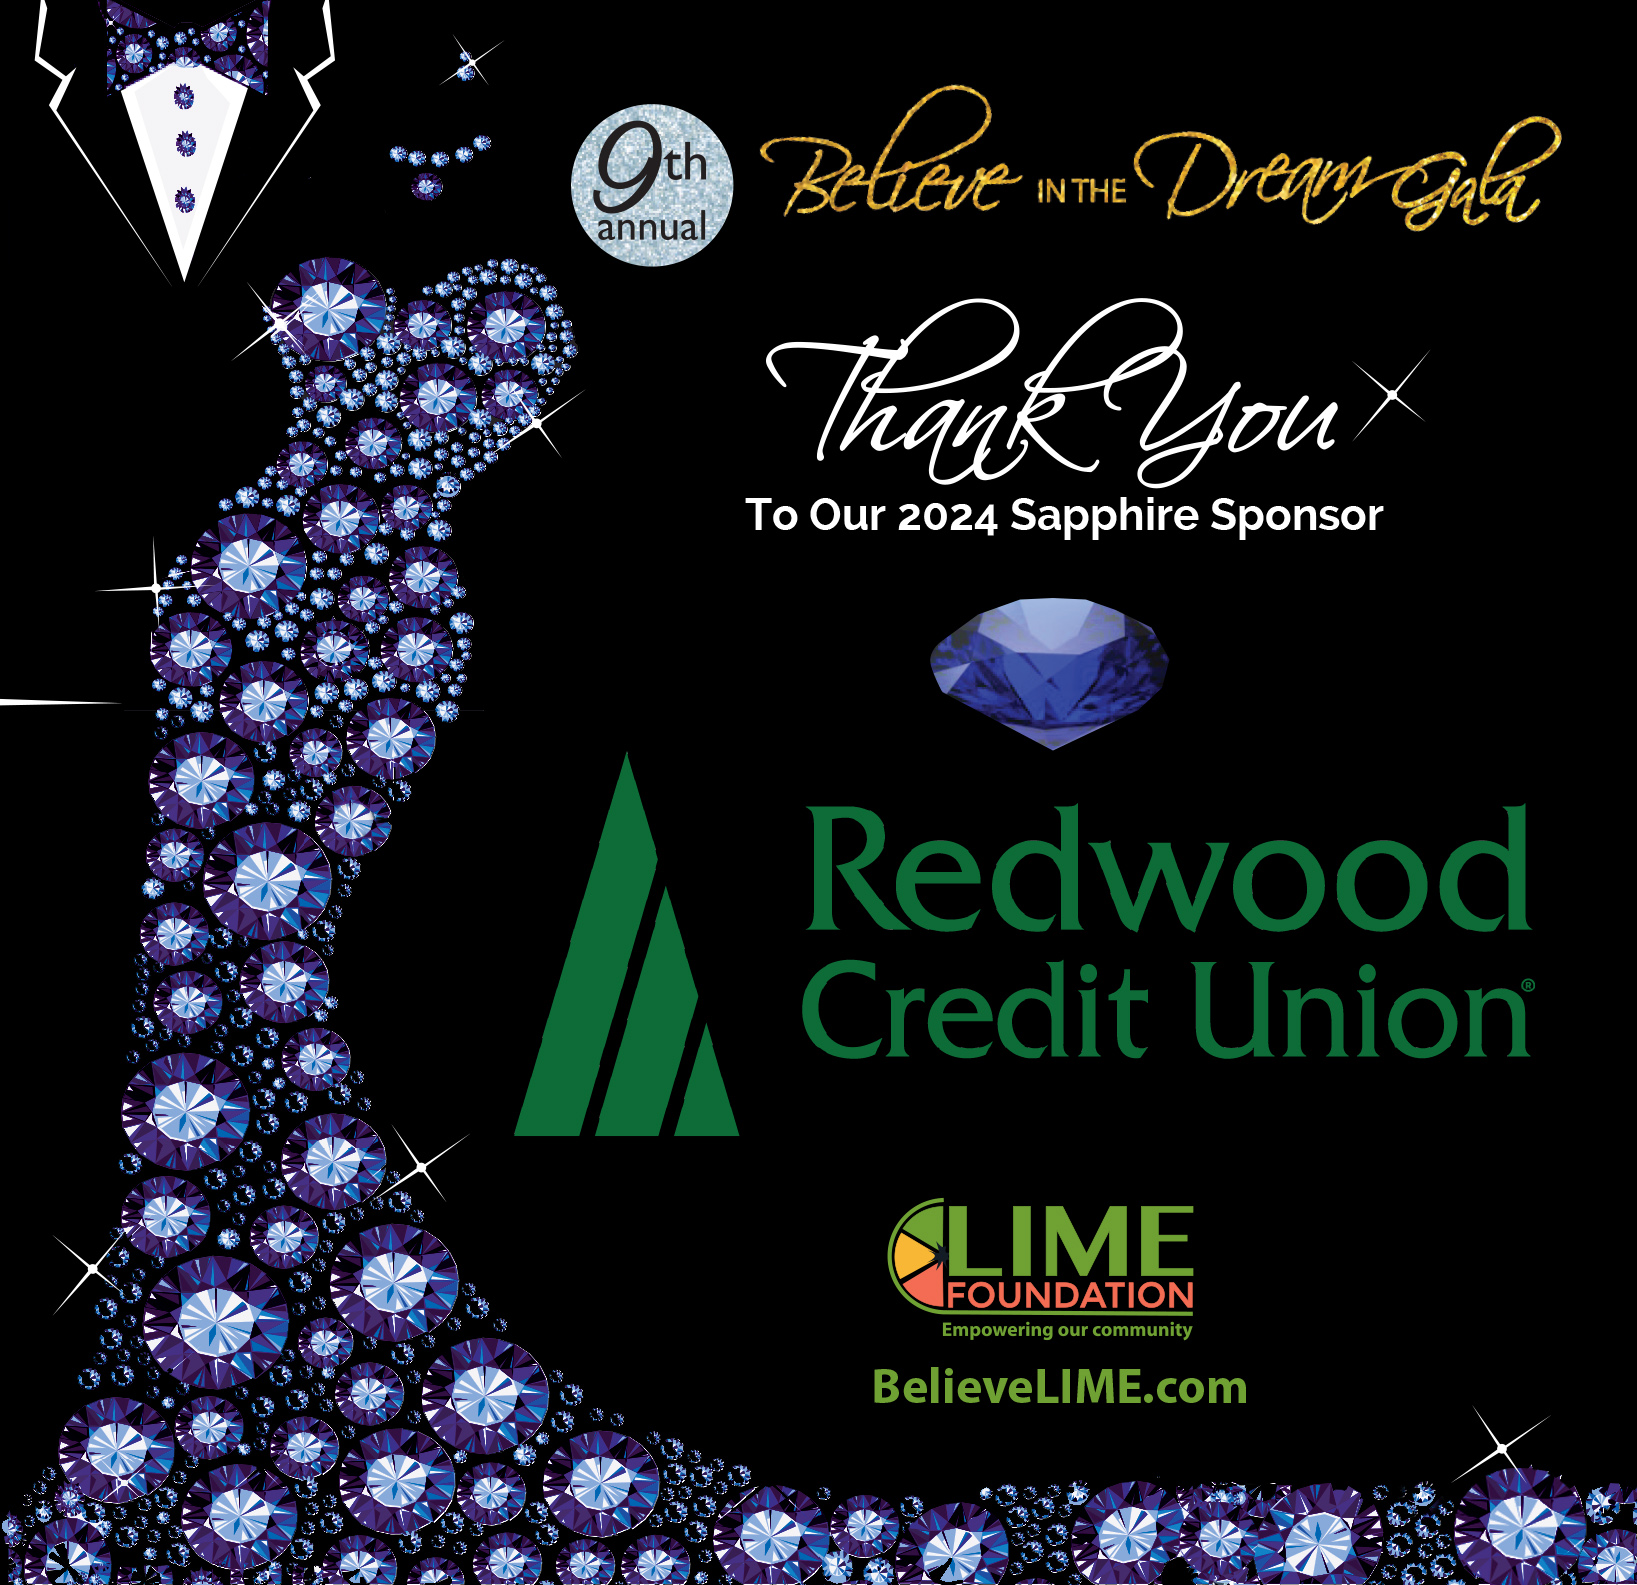 Graphic for the 9th annual Believe in the Dream Gala thanking the 2024 Sapphire sponsor, Redwood Credit Union, featuring a stylized peacock design made of sapphires.